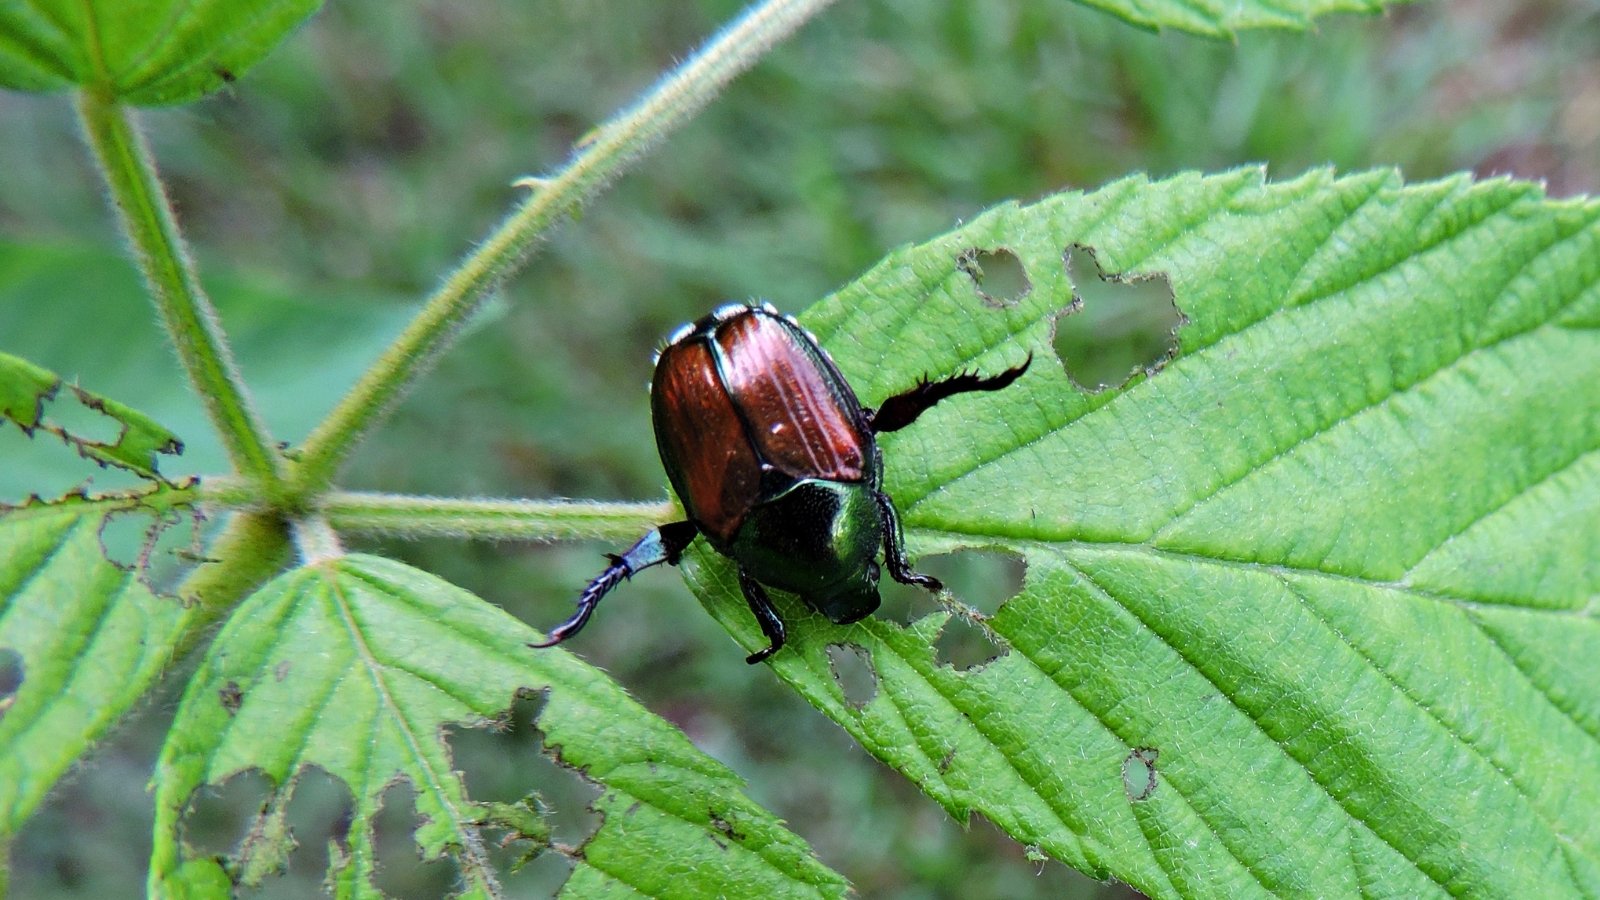 A Japanese beetle with a metallic green and copper body is perched on a leaf, chewing through the foliage with its mandibles.